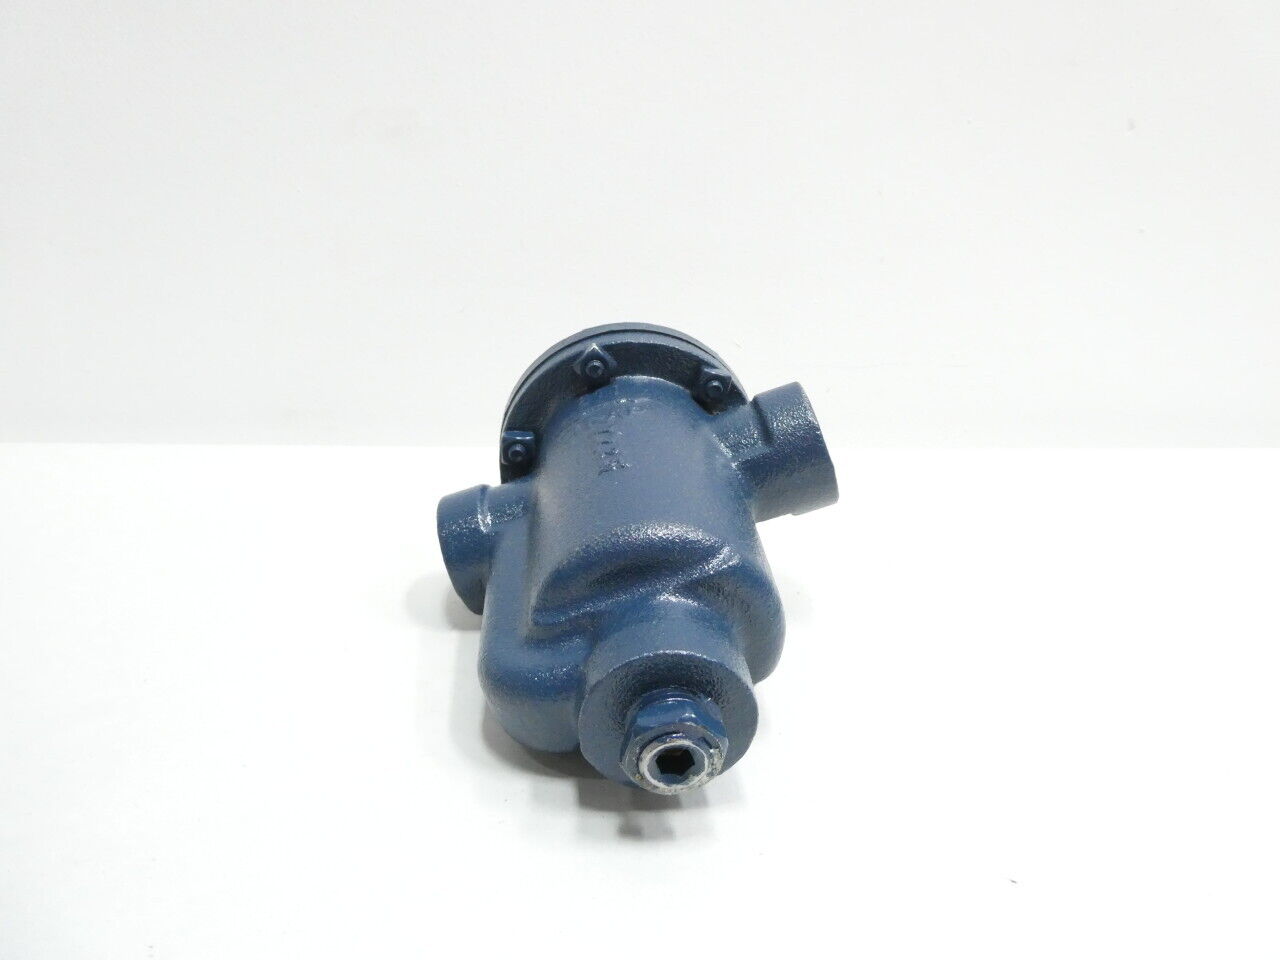 Armstrong D500065 811 Iron Threaded Inverted Bucket Steam Trap 200psi 1/2in Npt